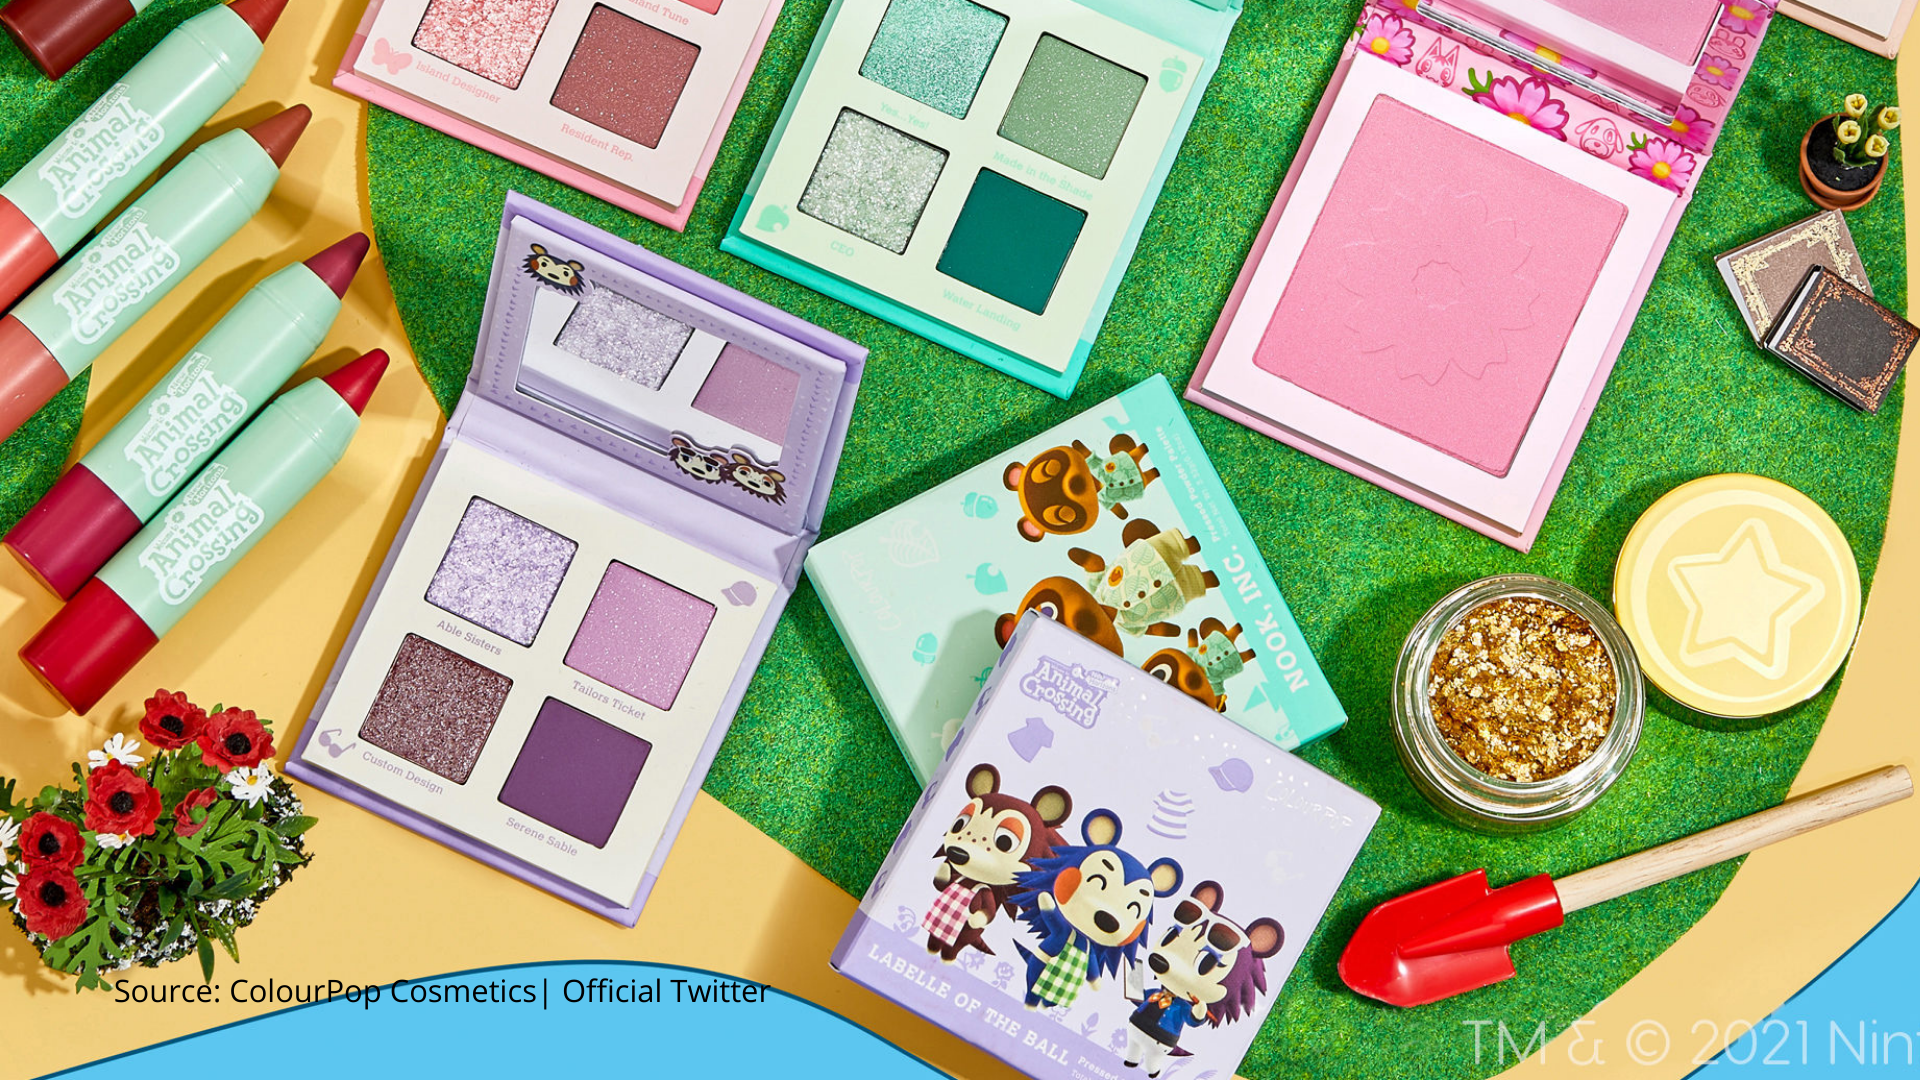 Animal Crossing Makeup Collection to Launch on Jan. 28